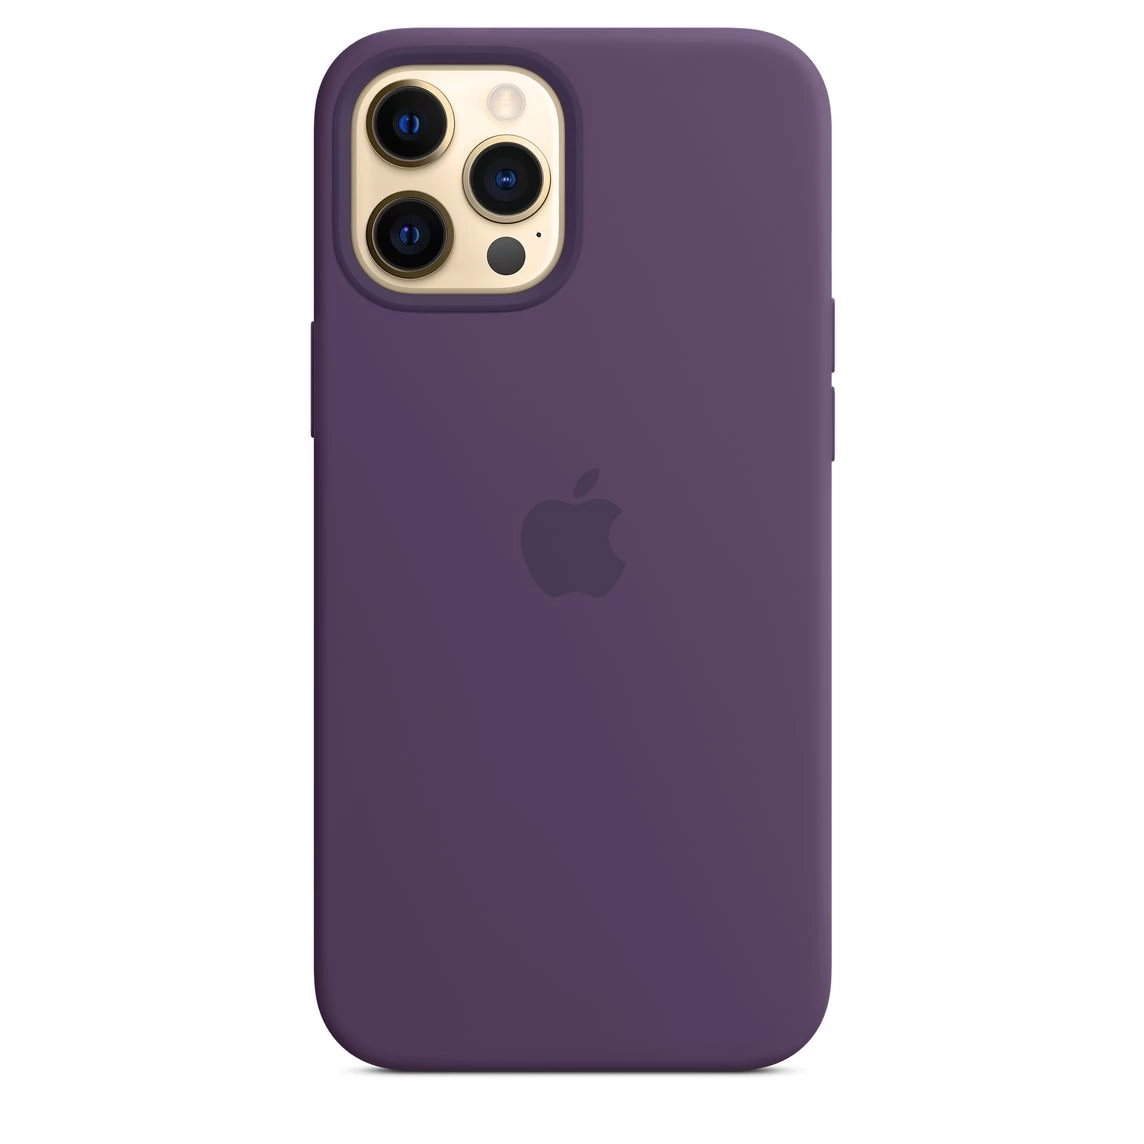 Apple iPhone 12 Pro Max Silicone Case with MagSafe Lux Copy - Amethyst (MK083)